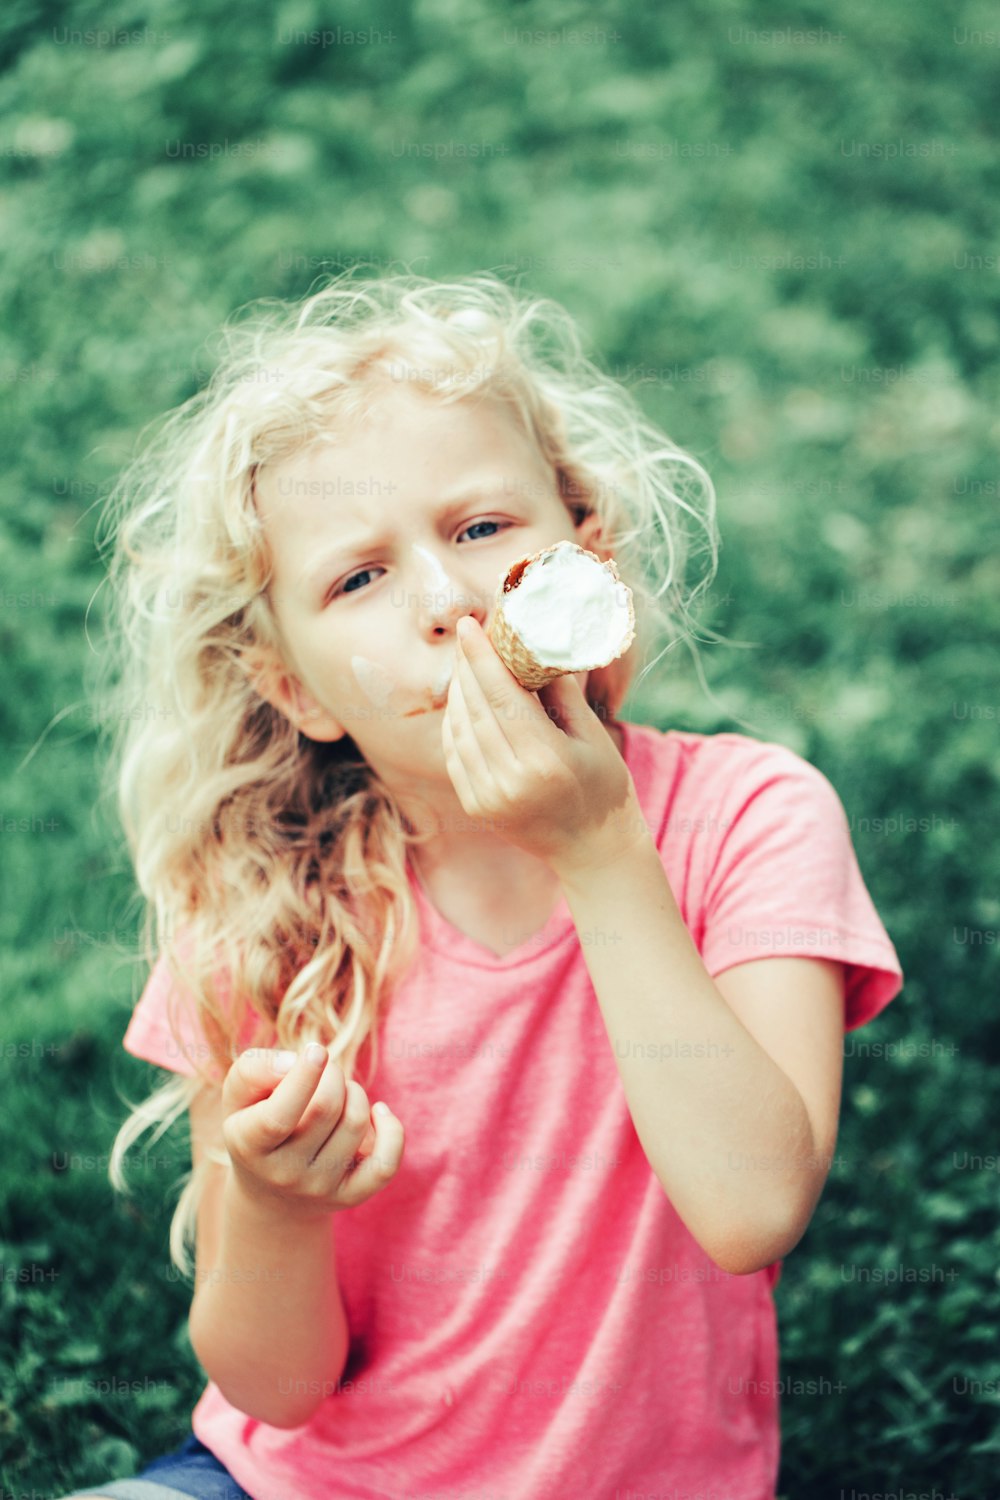 Cute funny adorable girl with long blonde messy hair eating licking ice cream from waffle cone. Child eating tasty sweet cold summer food outdoor. Summer frozen meal snack.